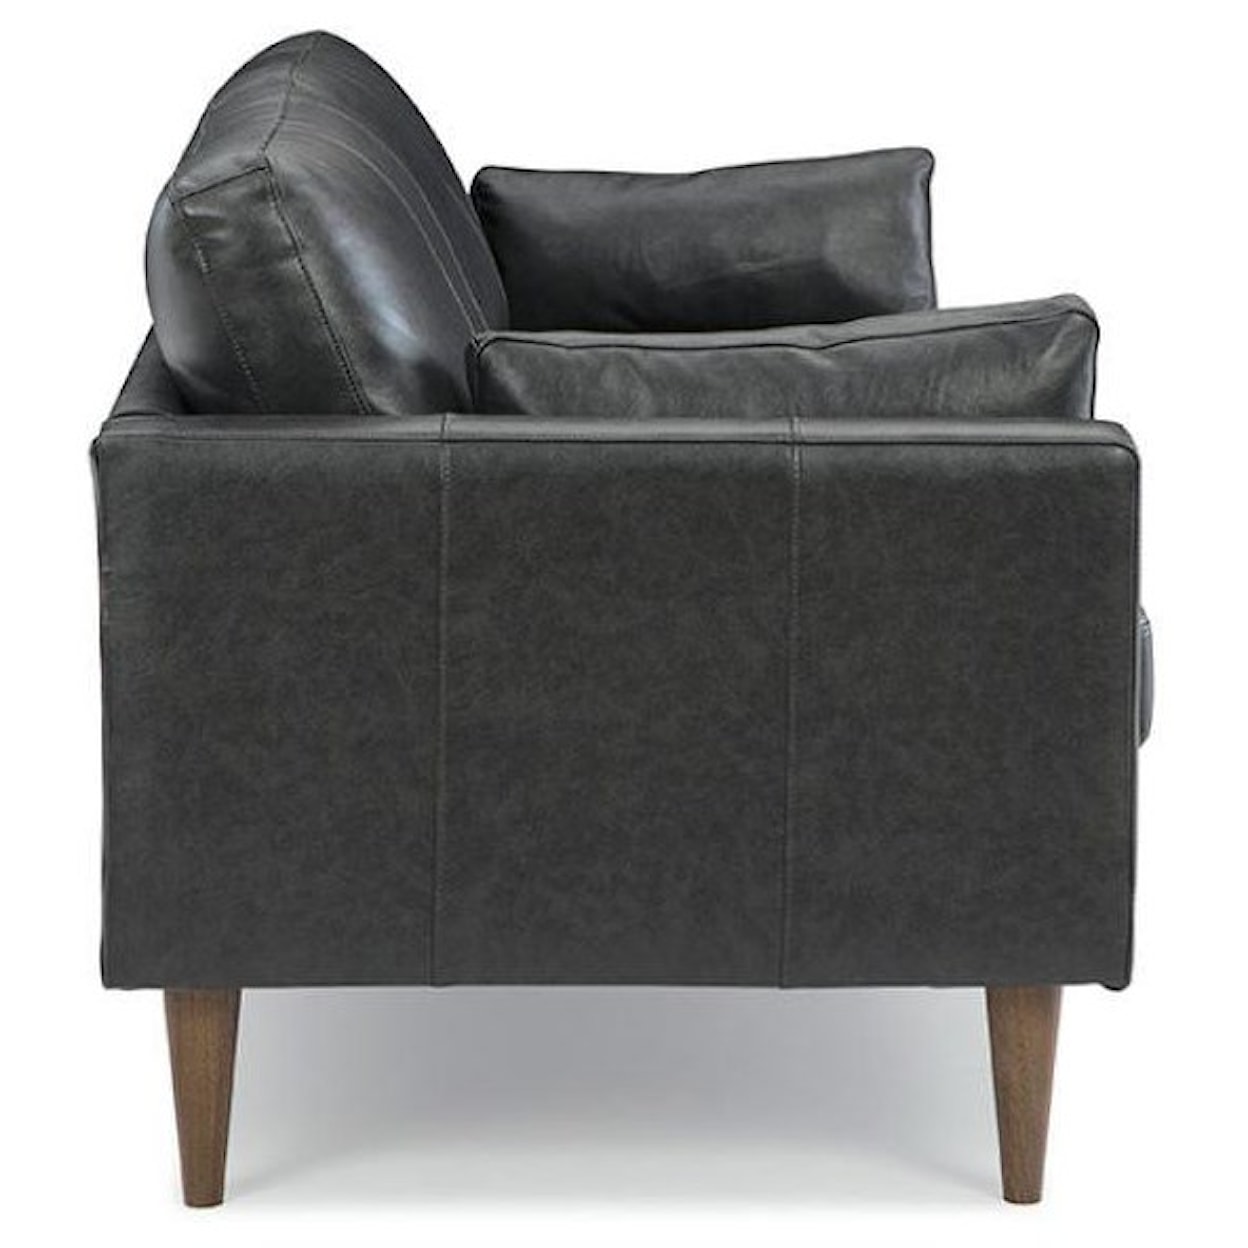 Best Home Furnishings Trafton Contemporary Small Scale Sofa